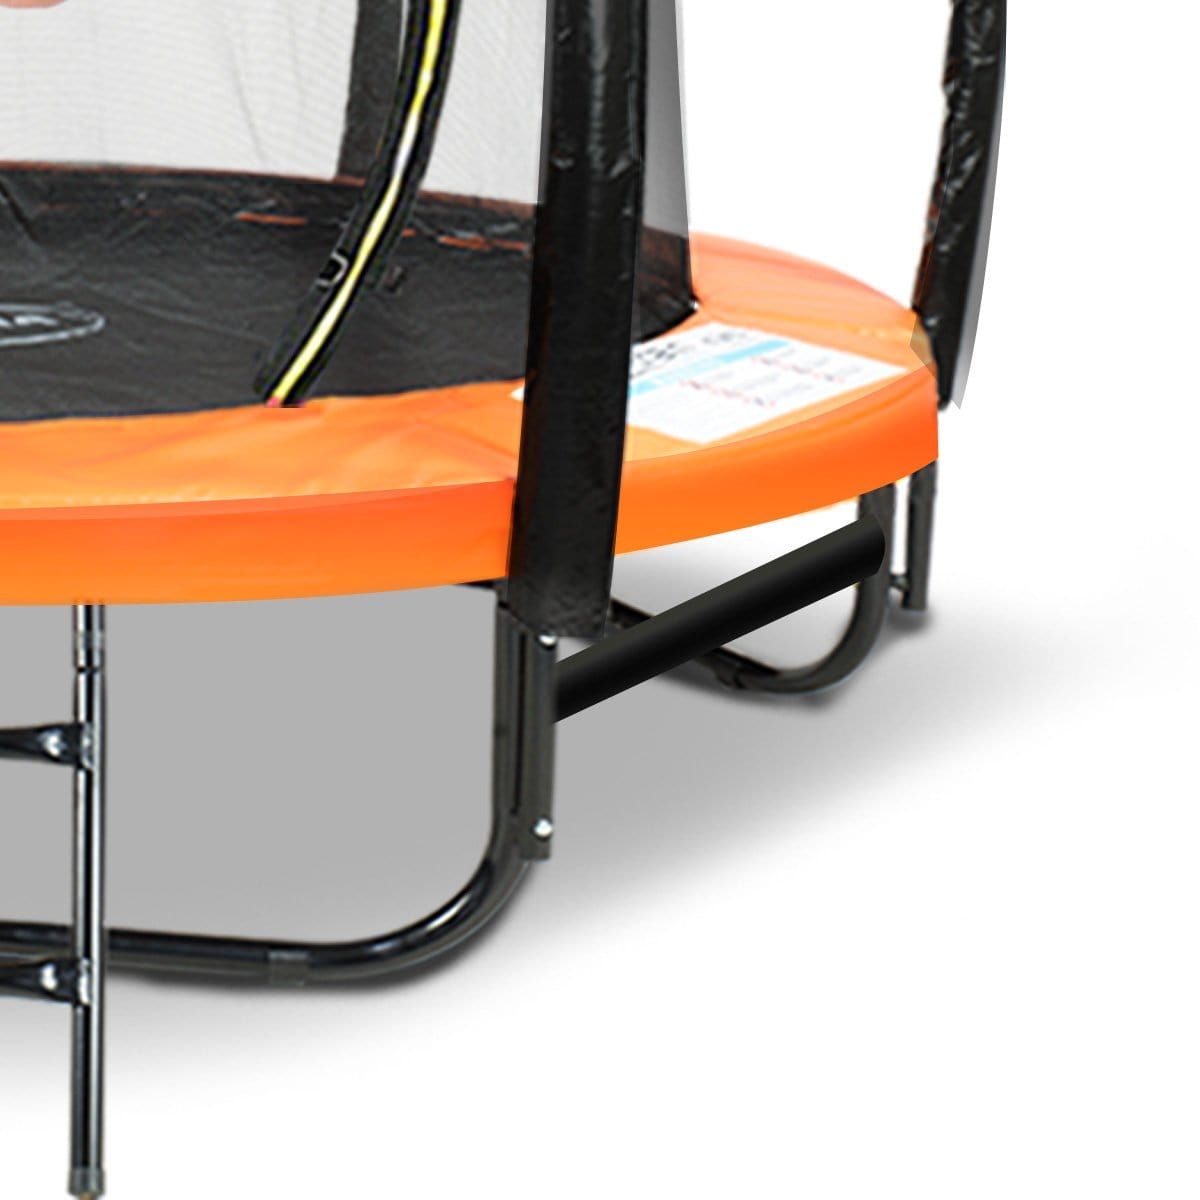 Trampoline 8 Ft With  Roof - Orange